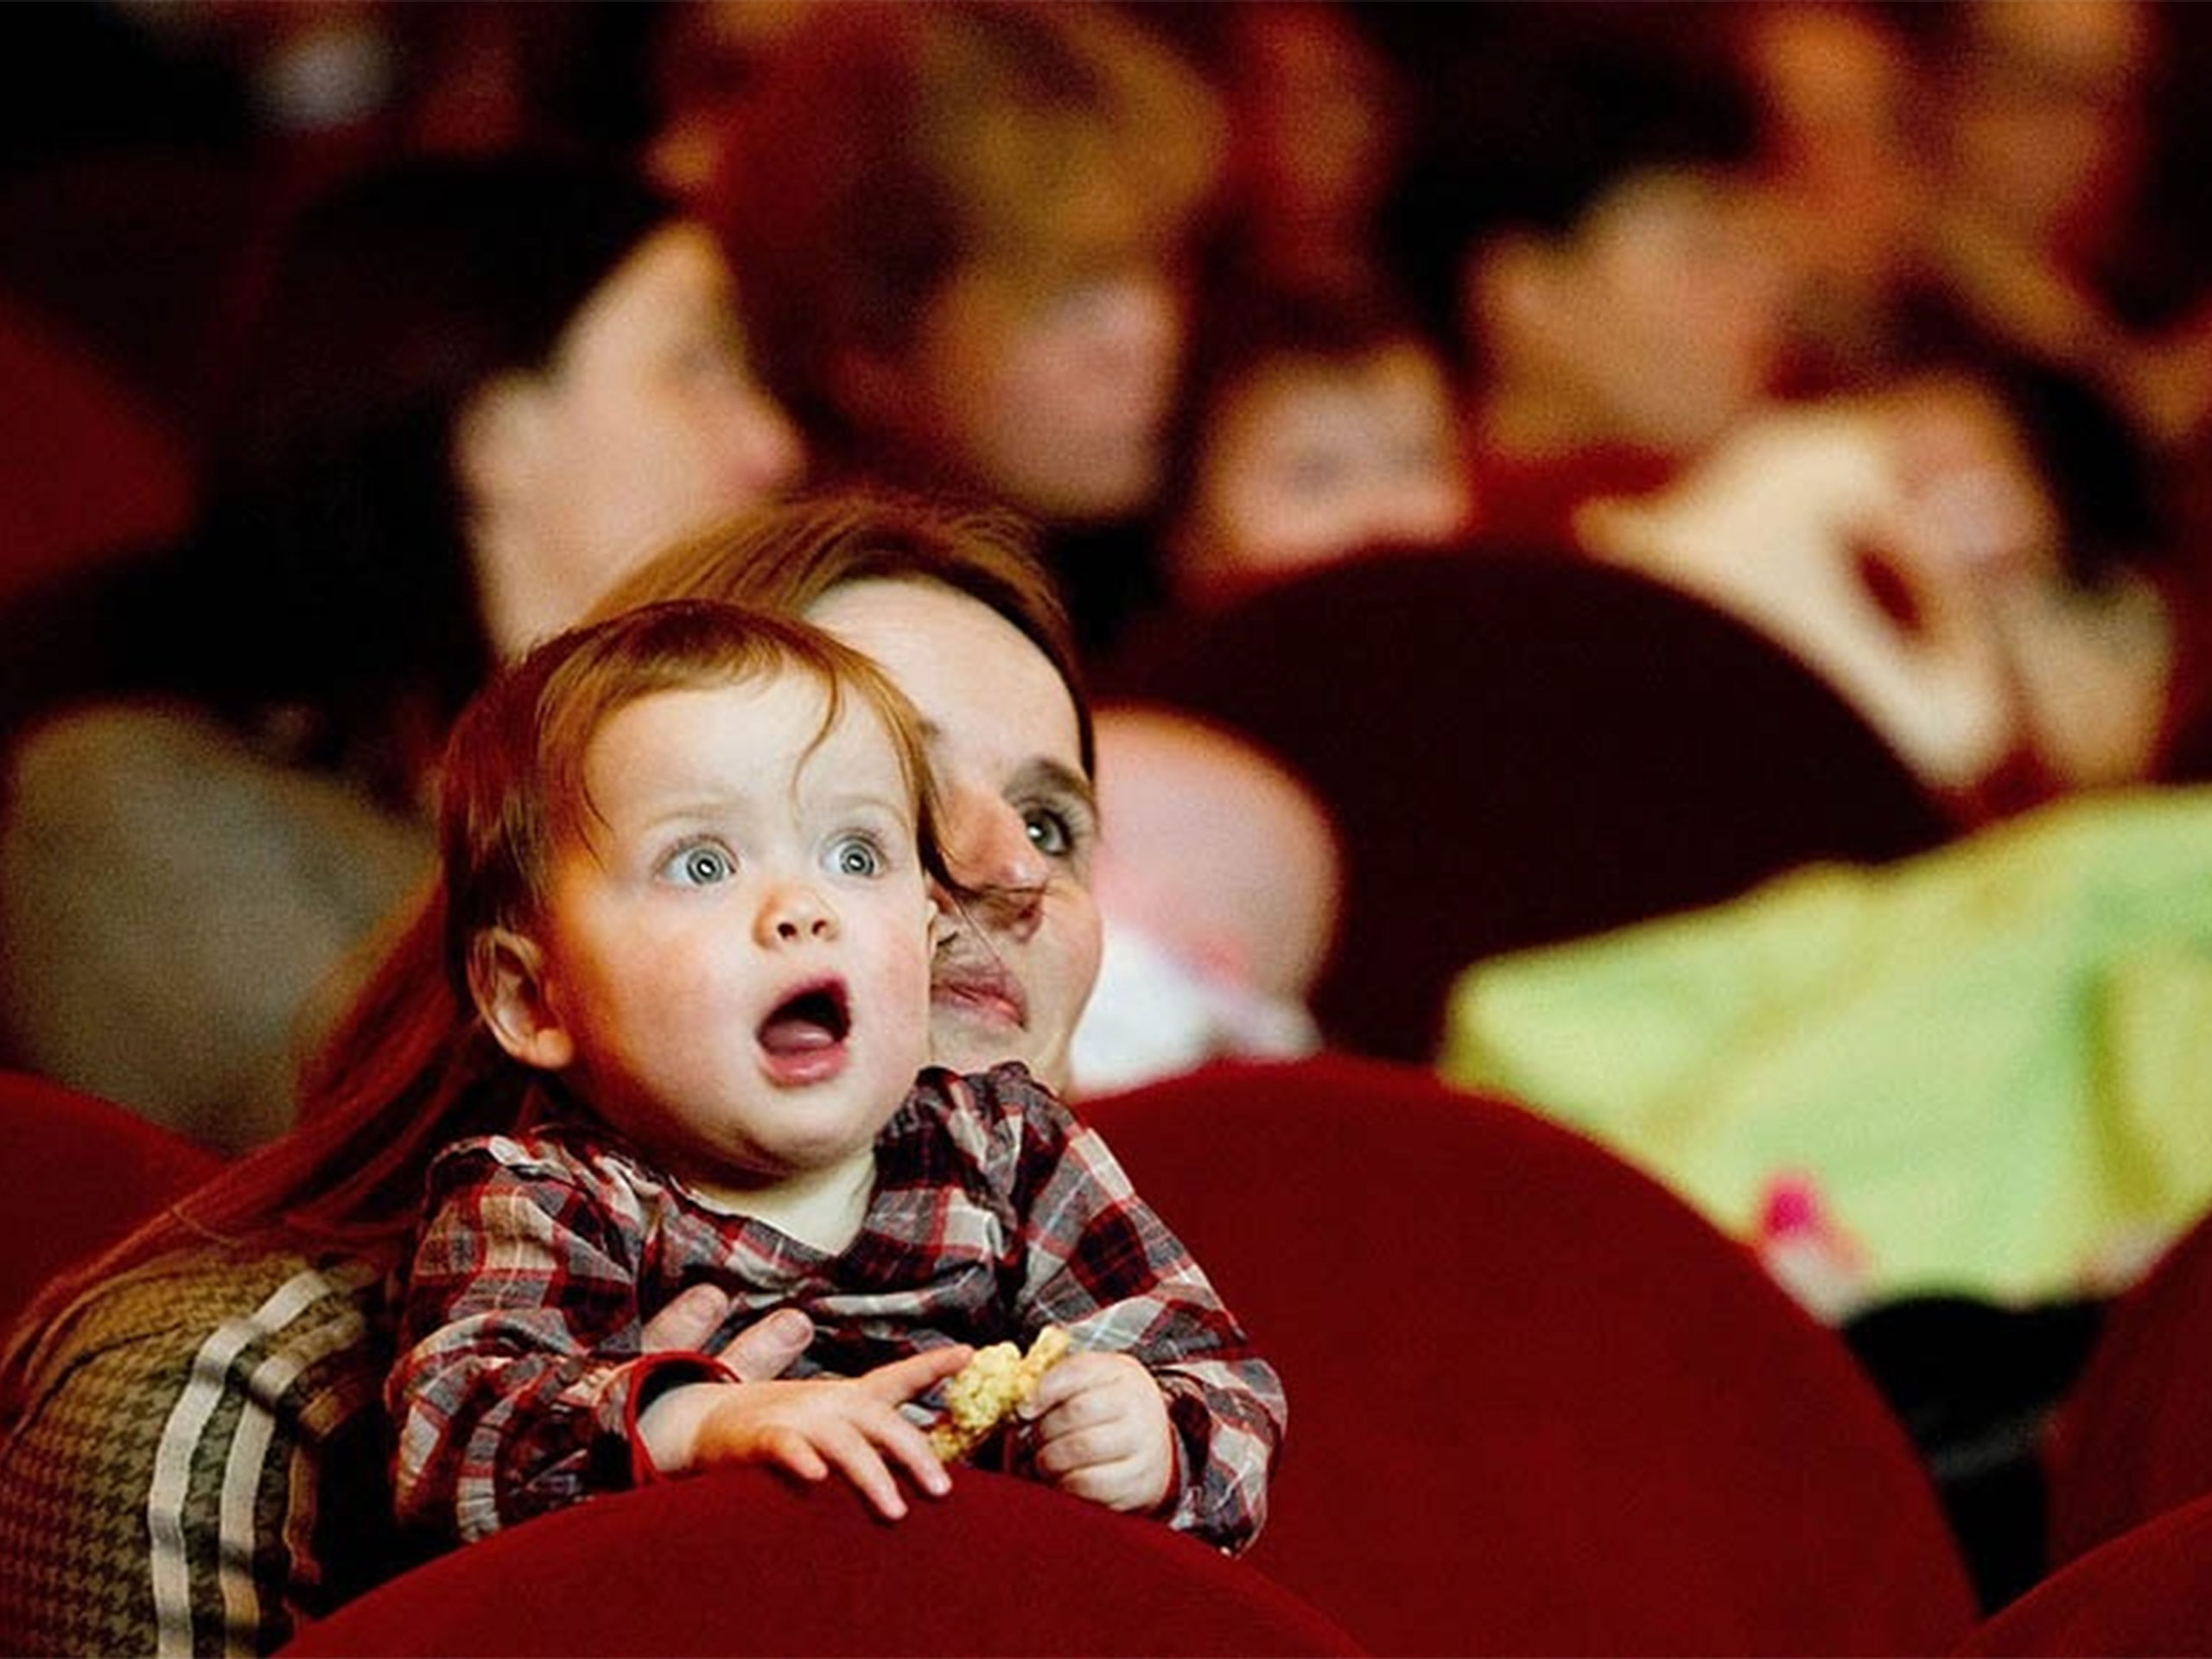 A monther and baby watching a film